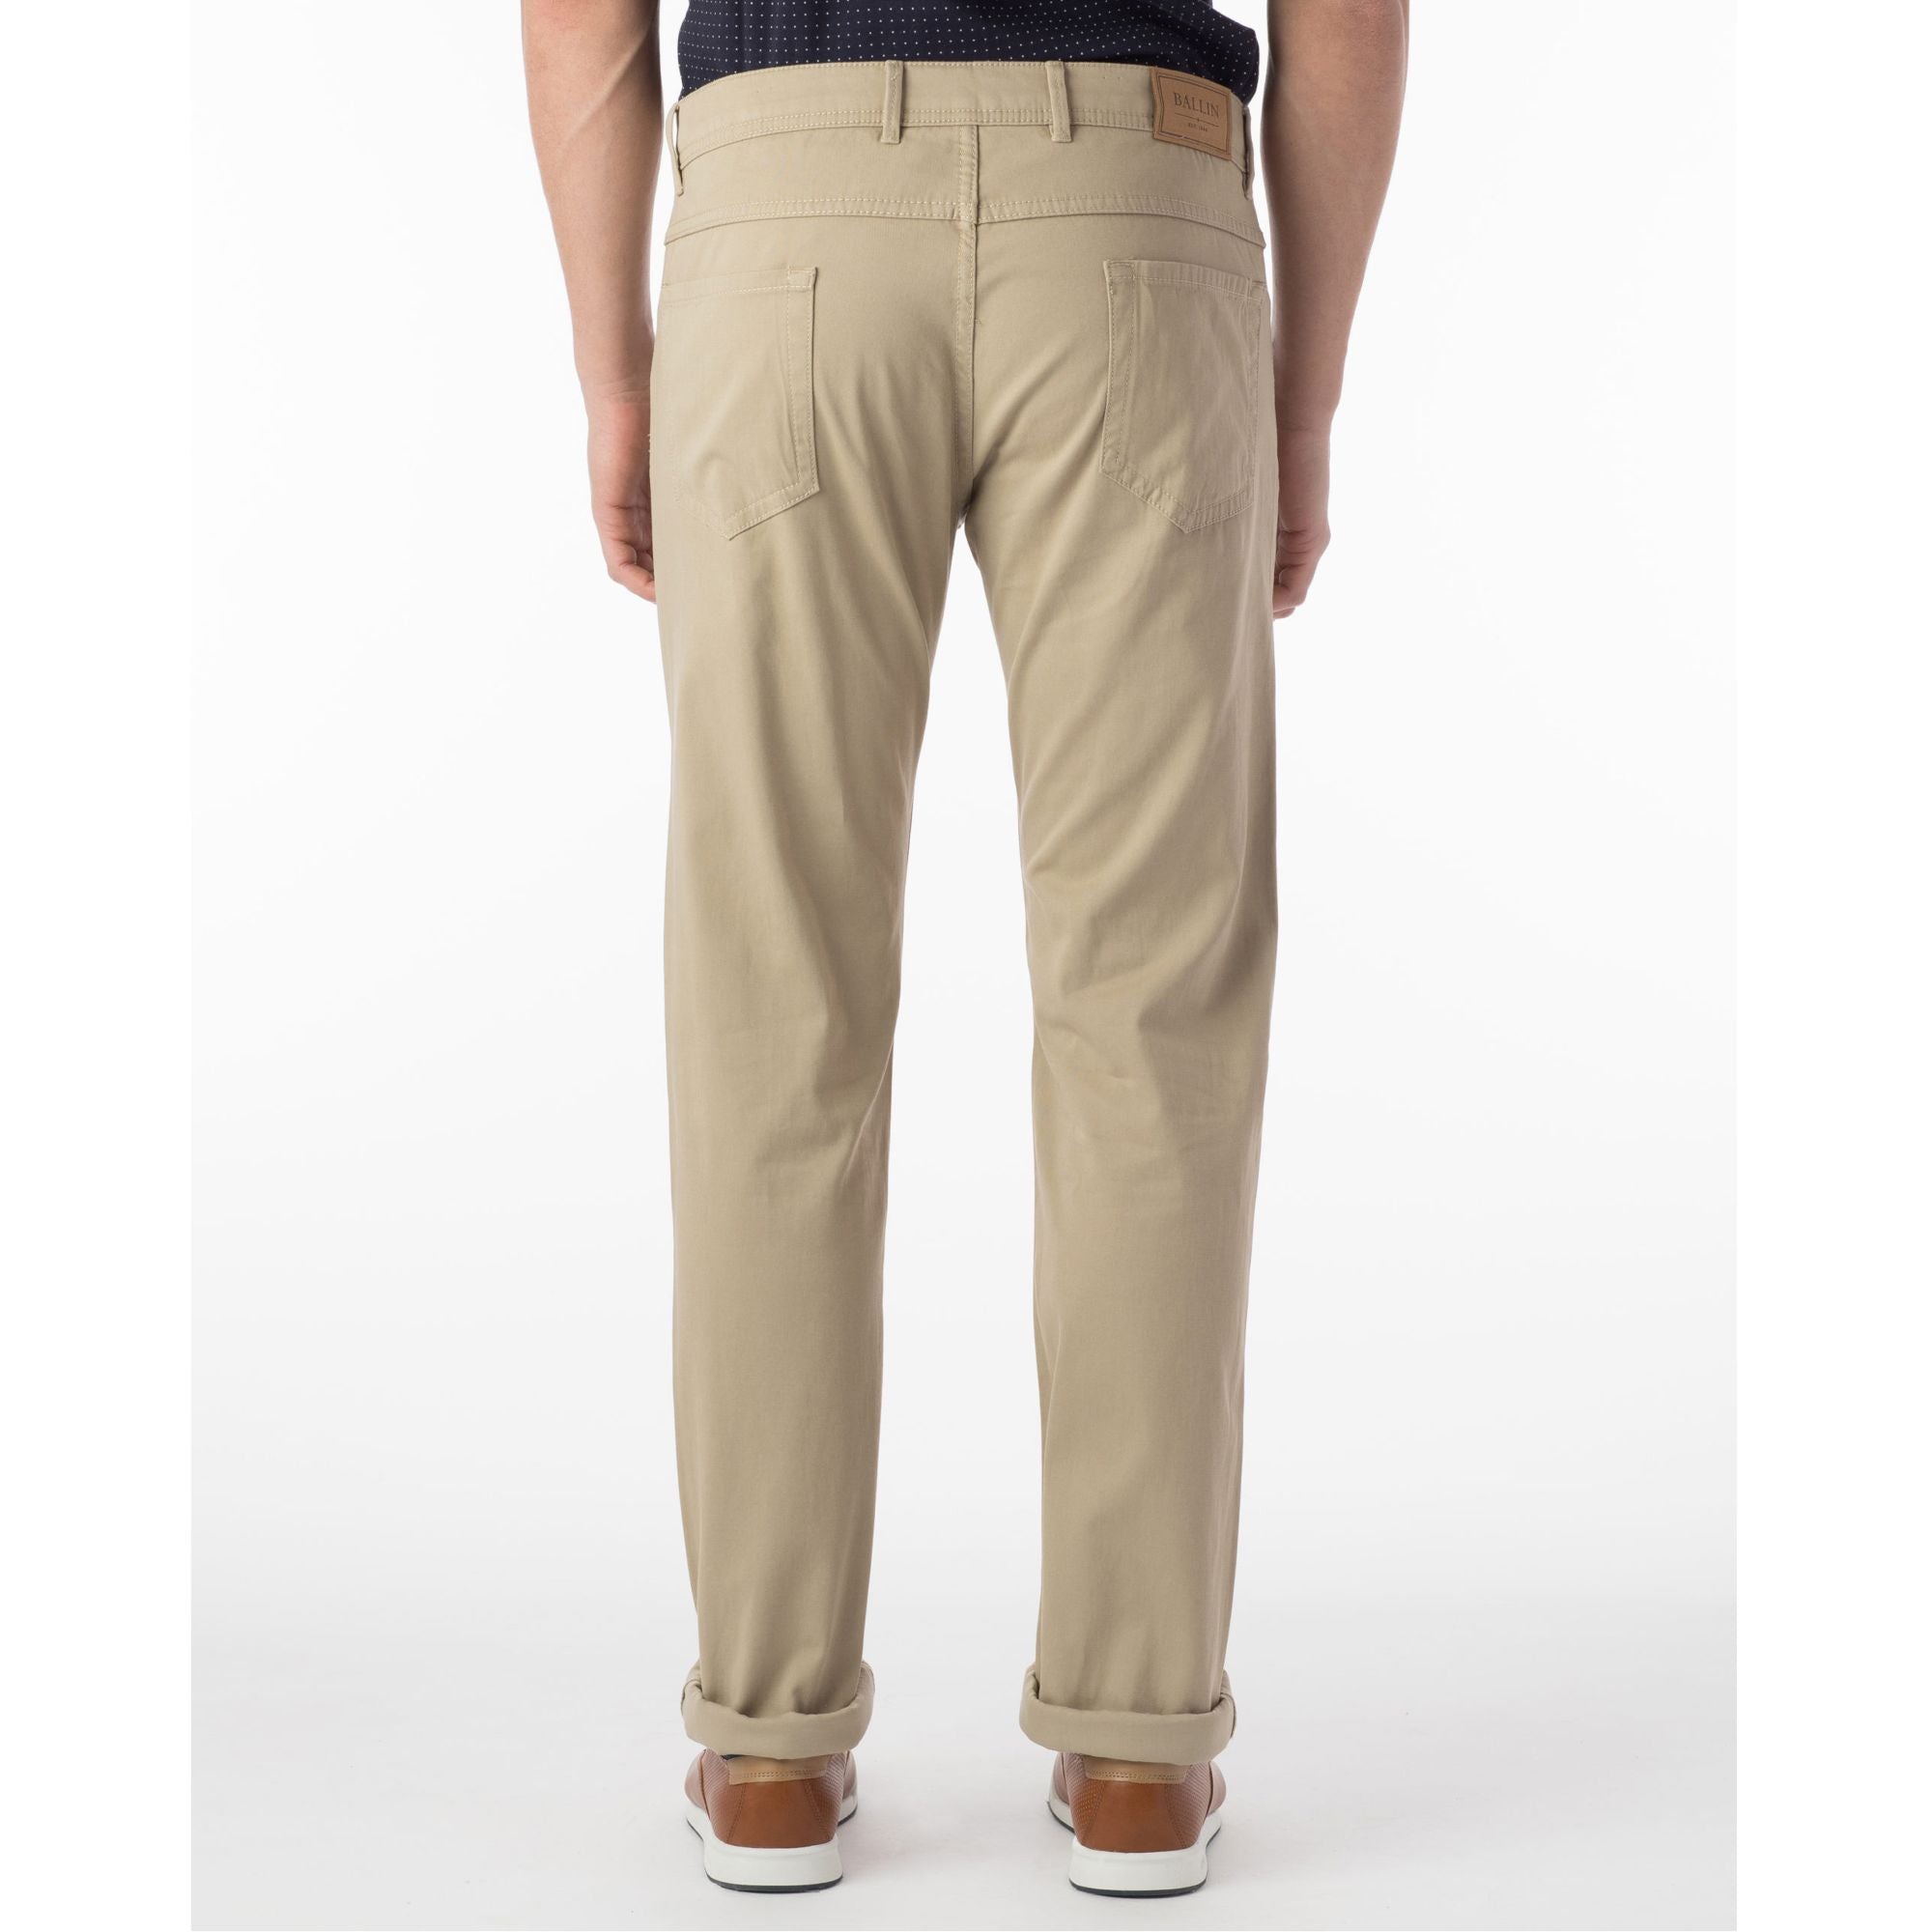 Perma Color Pima Twill 5-Pocket Pants in True Khaki, Size 36 (Crescent Modern Fit) by Ballin